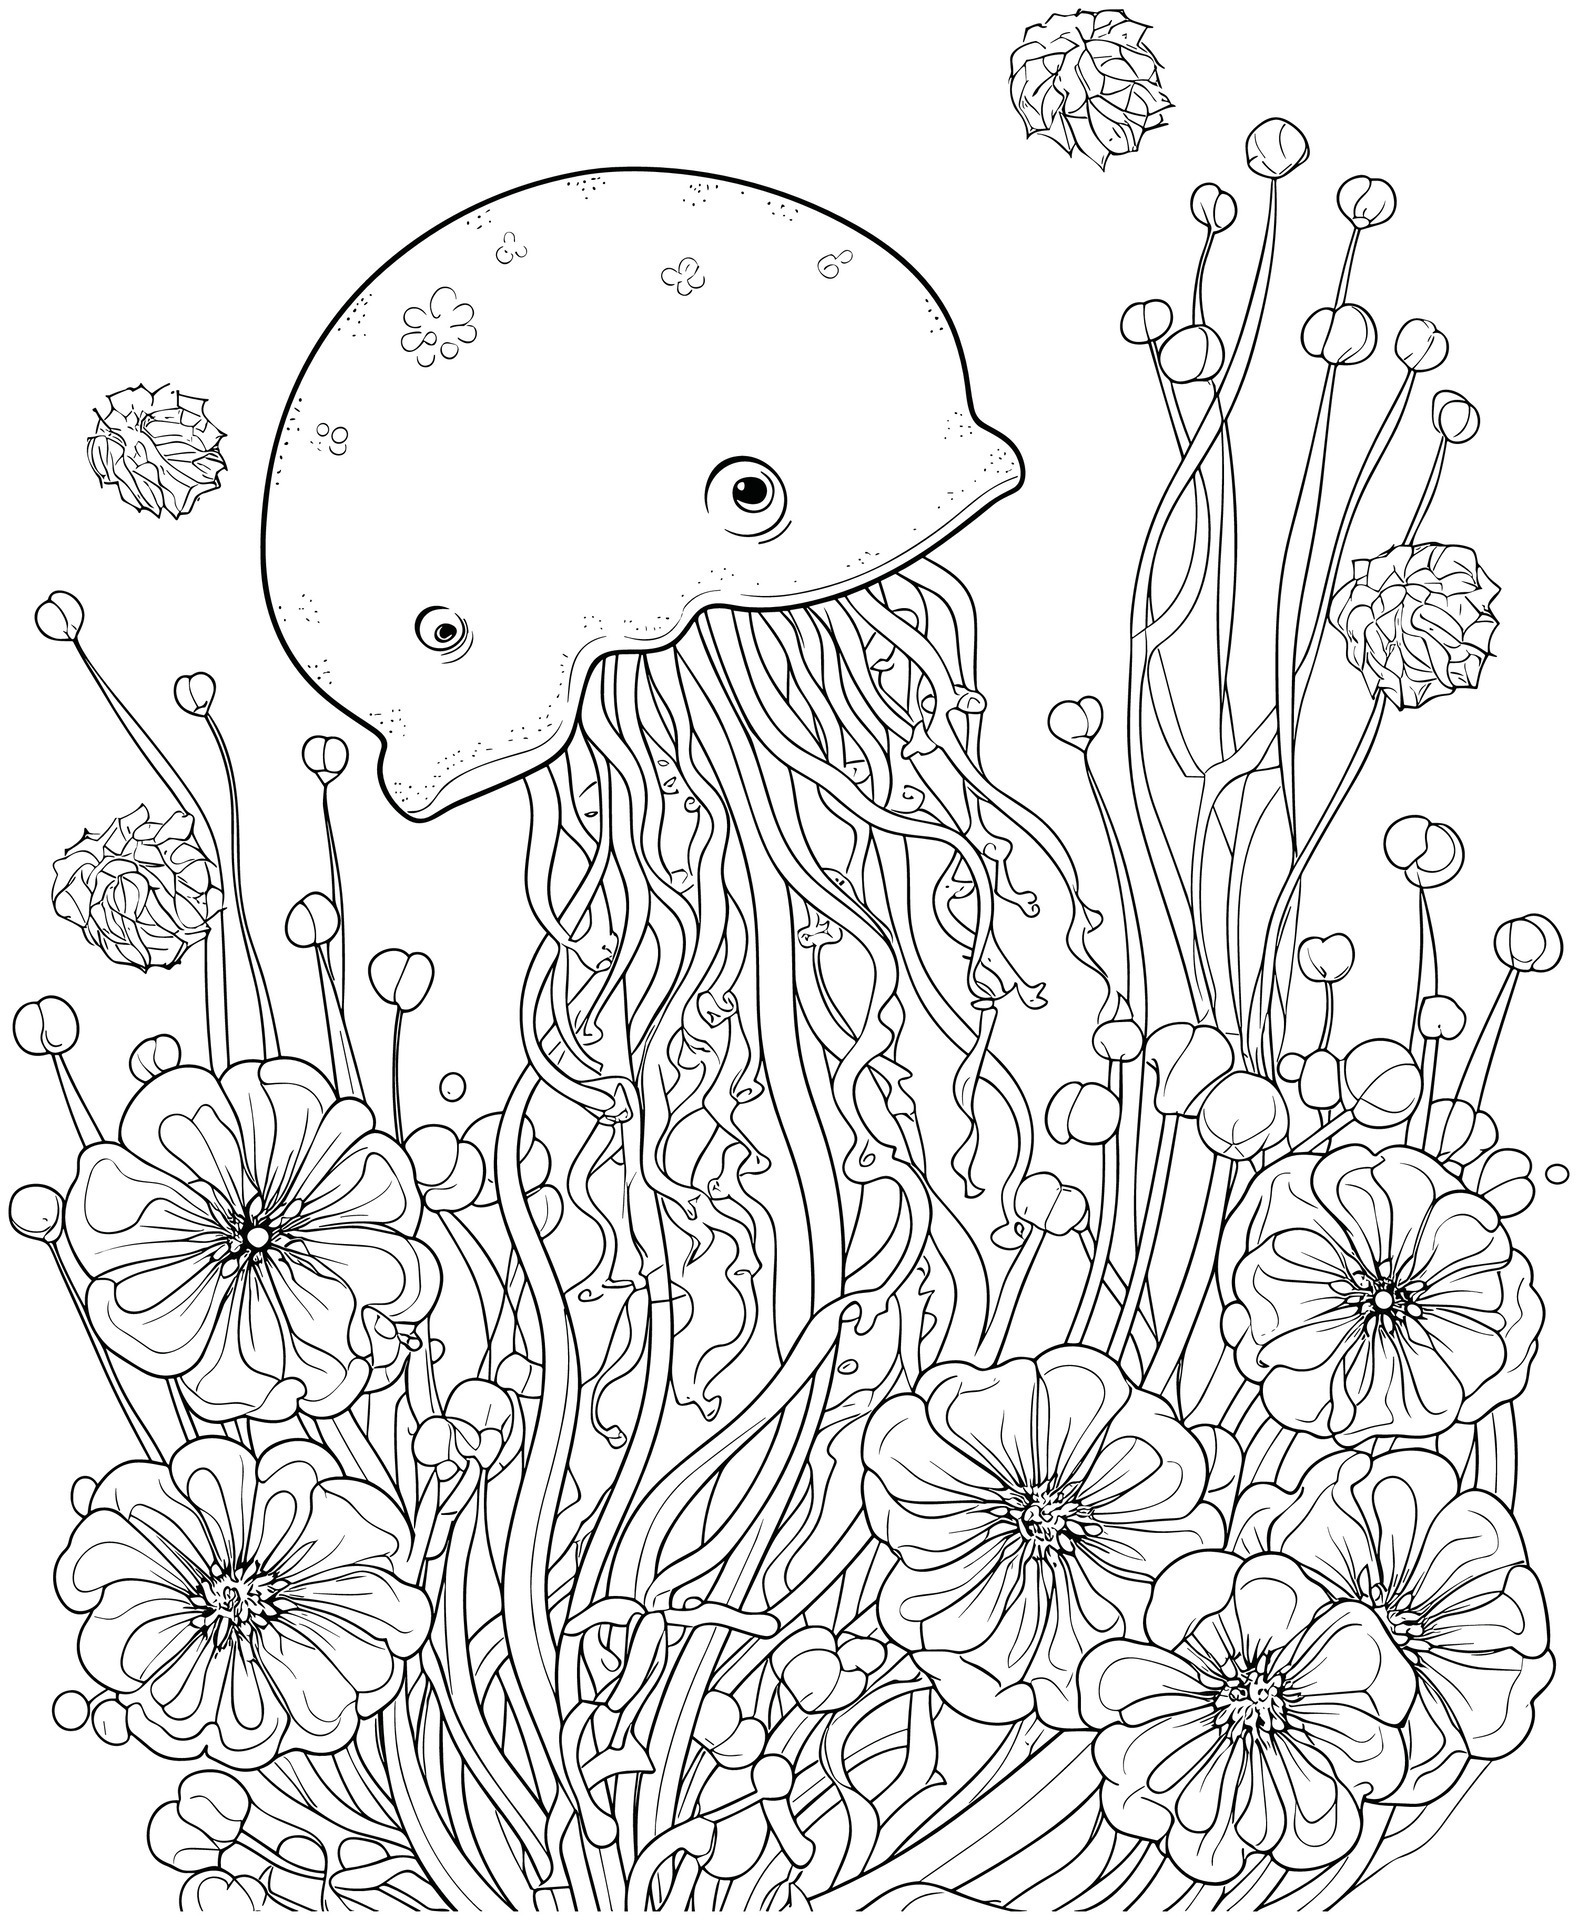 195 Jellyfish Coloring Page Designs: Underwater Beauty in Color 185